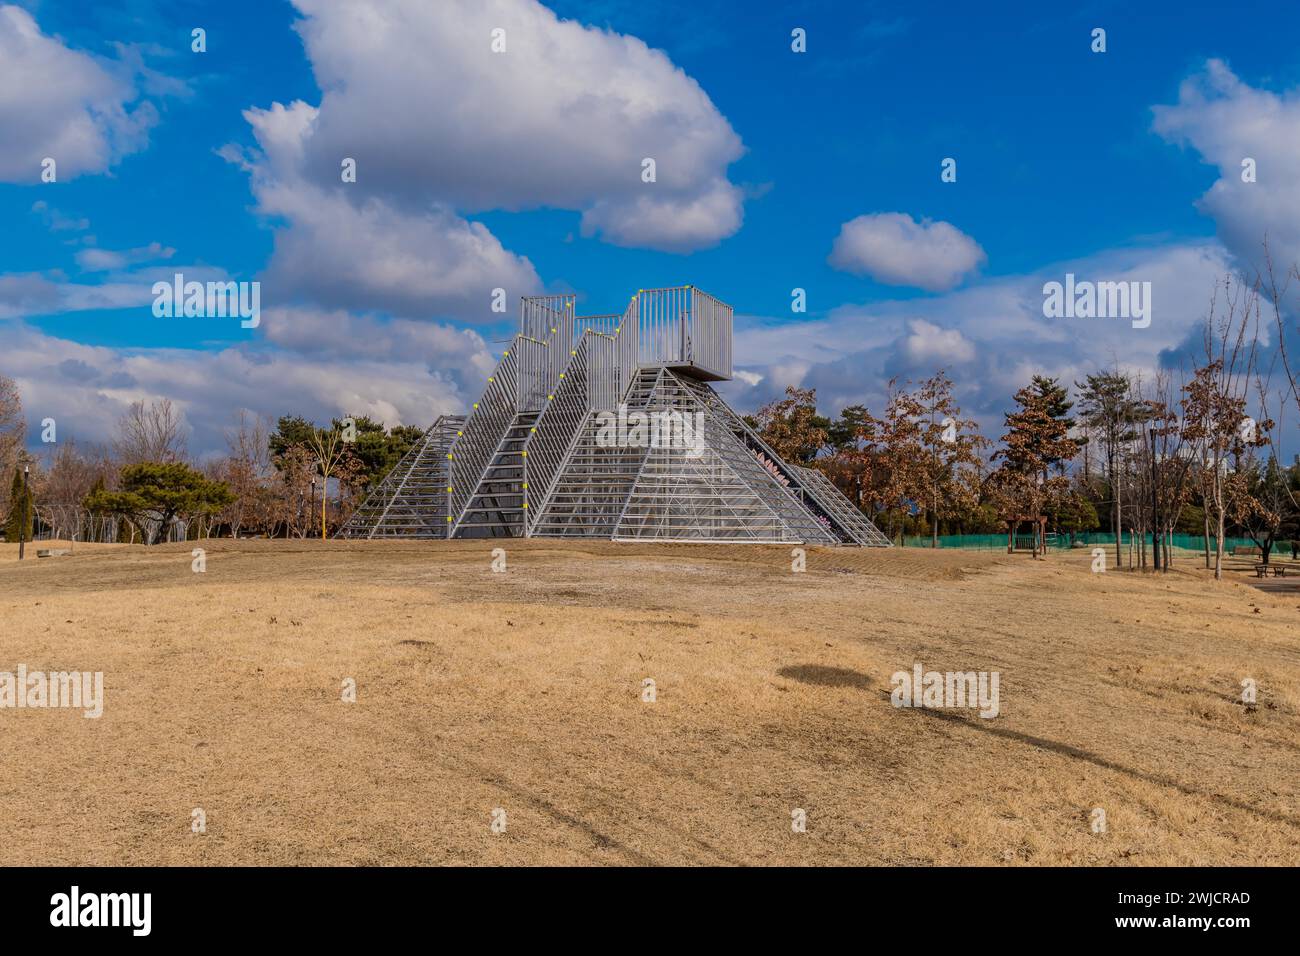 Metal pyramid observation tower in public urban park under beautiful blue cloudy sky in Daejeon, South Korea Stock Photo